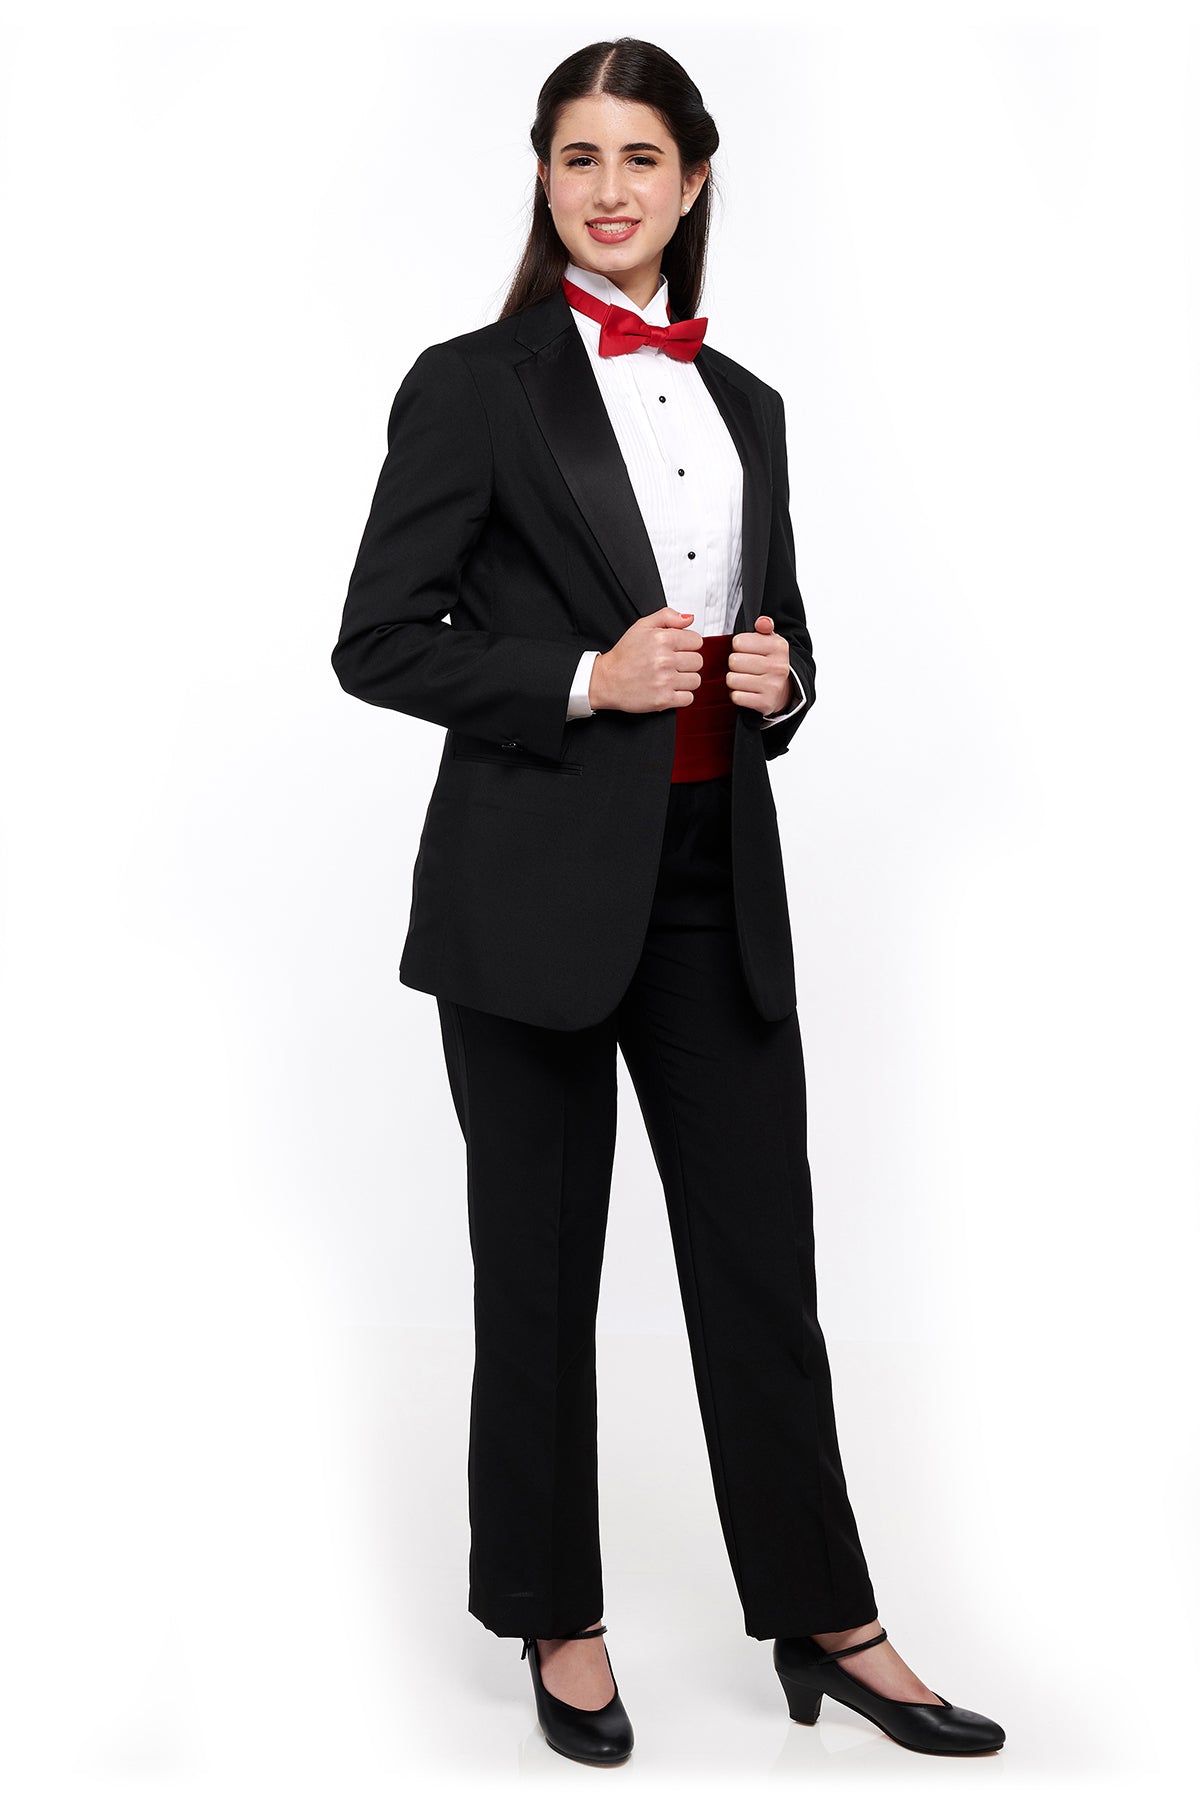 NEW! HUGH-L (Style #3002L) - Ladies Polyester Tuxedo Package